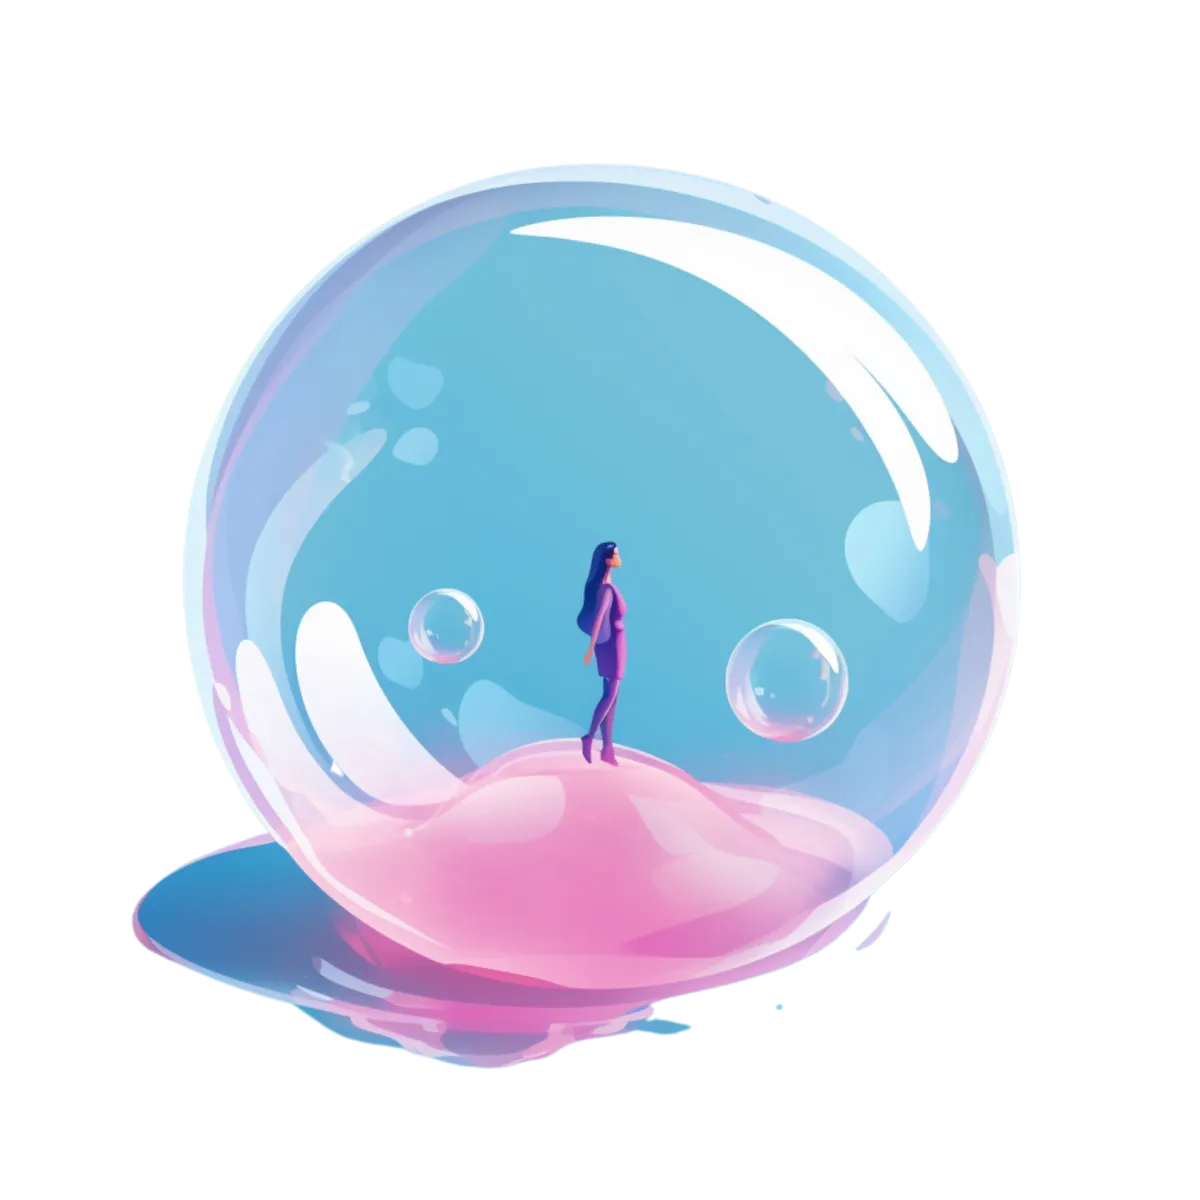 Bisiness owner in a bubble